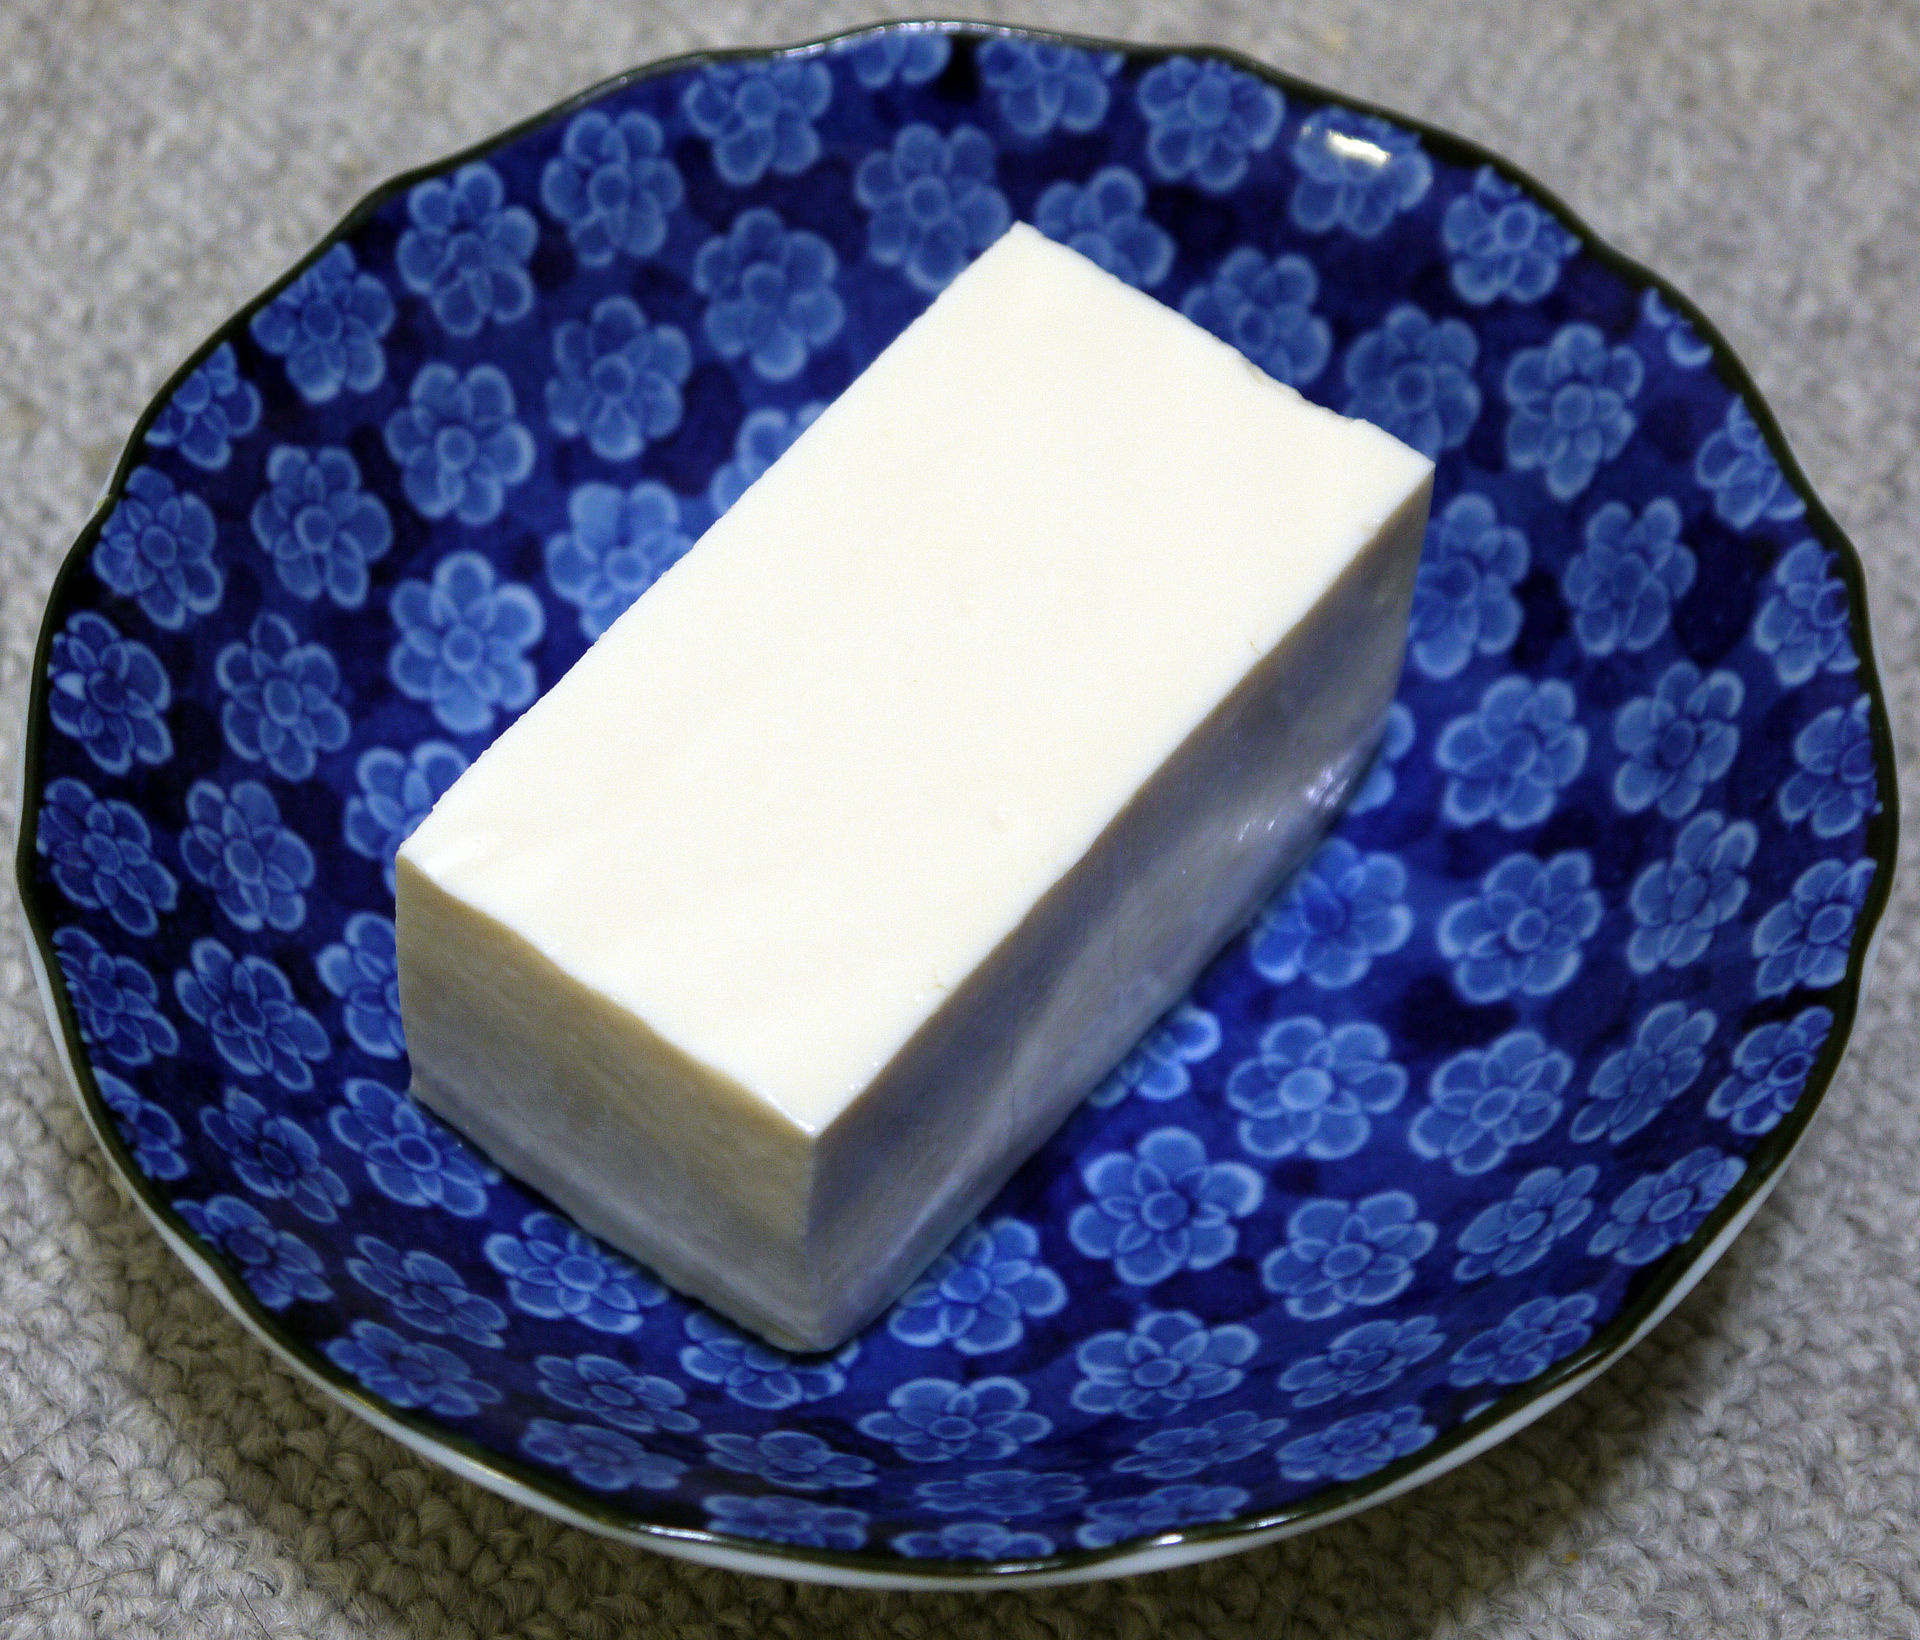 Chinese made tofu on a plate